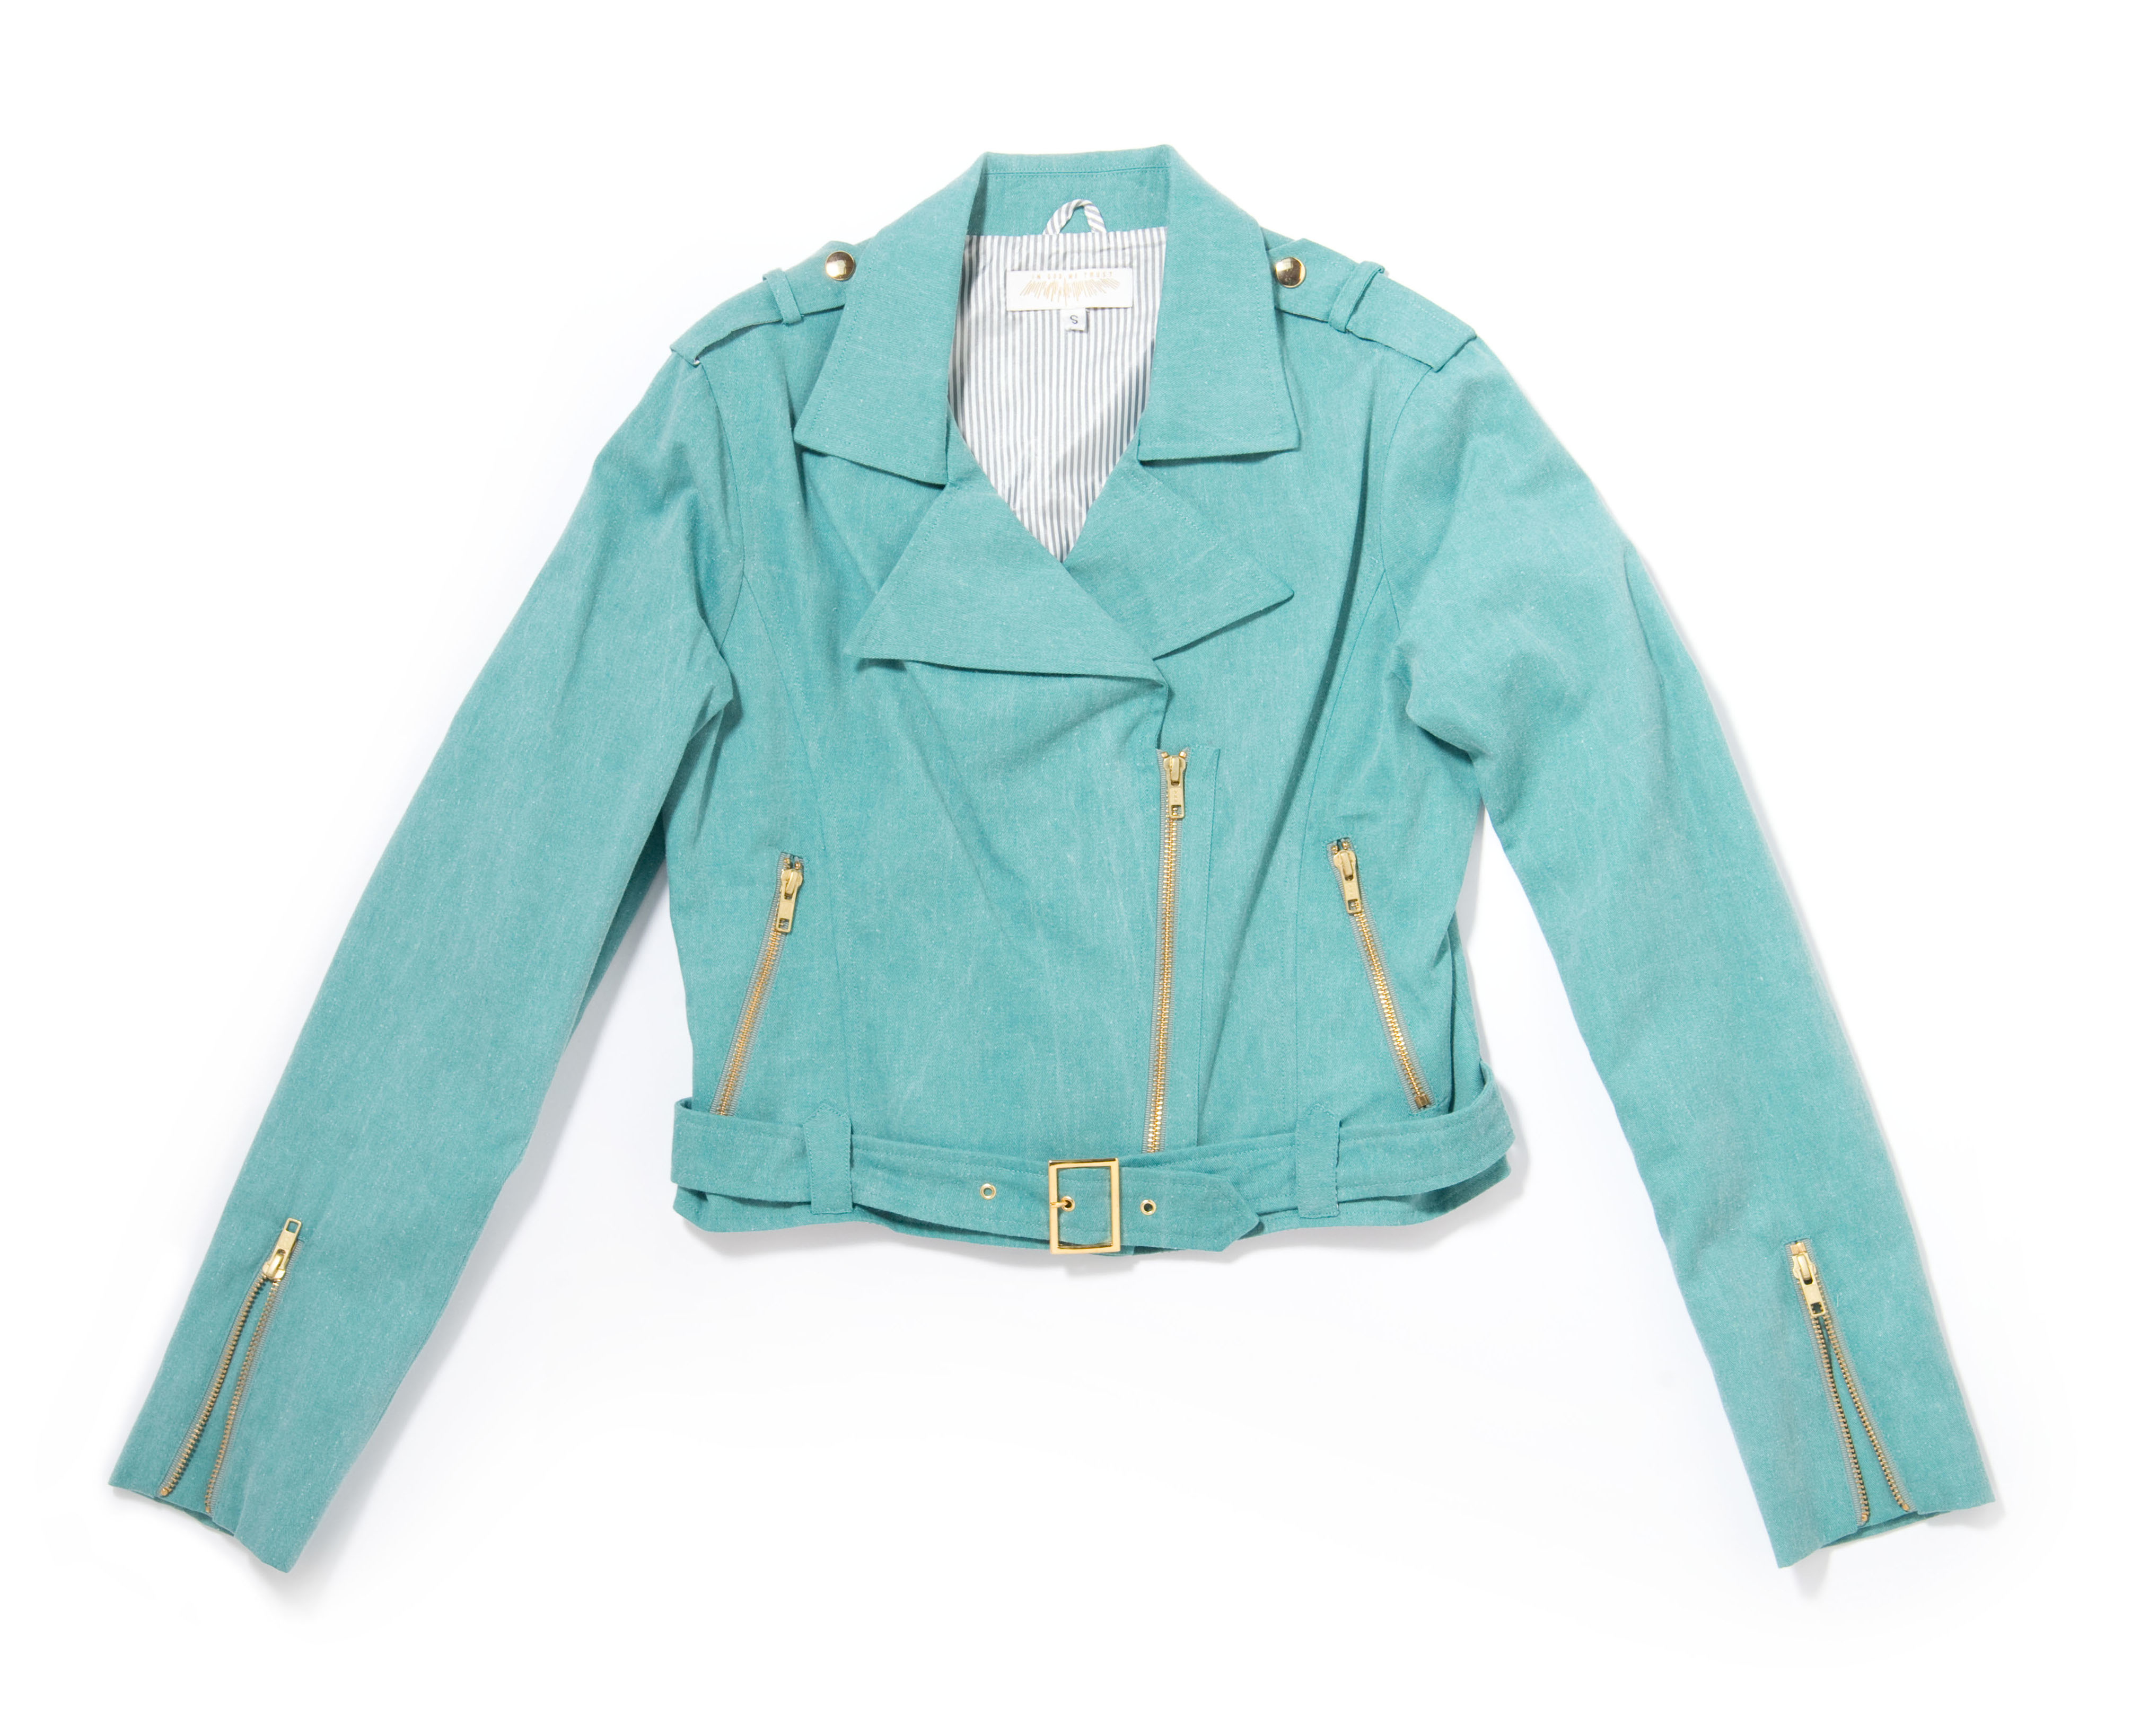 <br><a href="http://ingodwetrustnyc.com/collections/bonanza-sale/products/moto-jacket-teal-cotton-twill">Moto Jacket in Teal Cotton Twill</a>, $40 (was $360). All images via IGWT